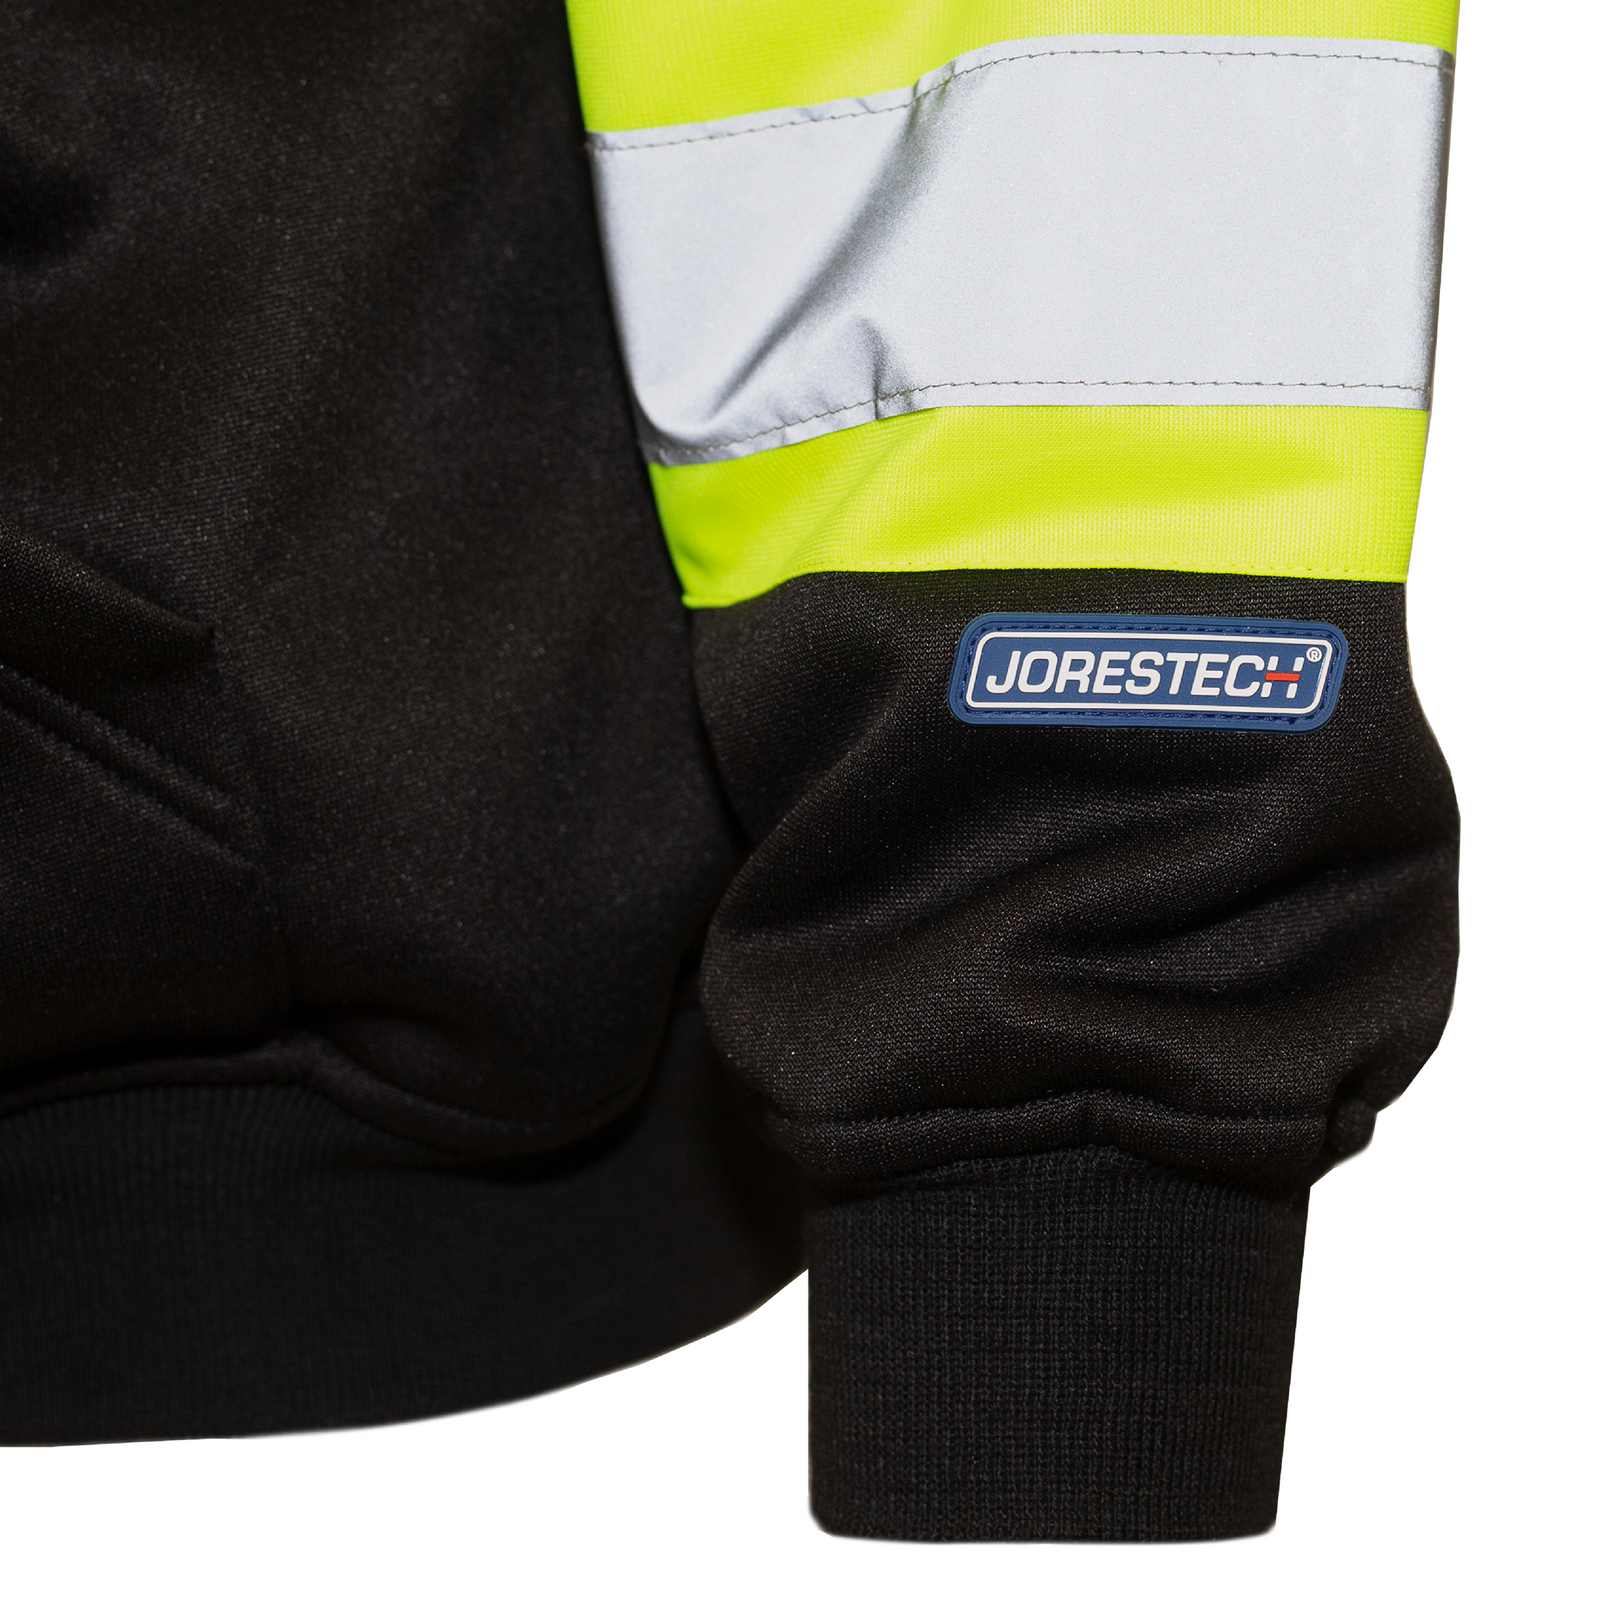 Close up showing elastic cuff, reflective stipes and yellow contrasting stripes of the JORESTECH black ANSI safety sweatshirt